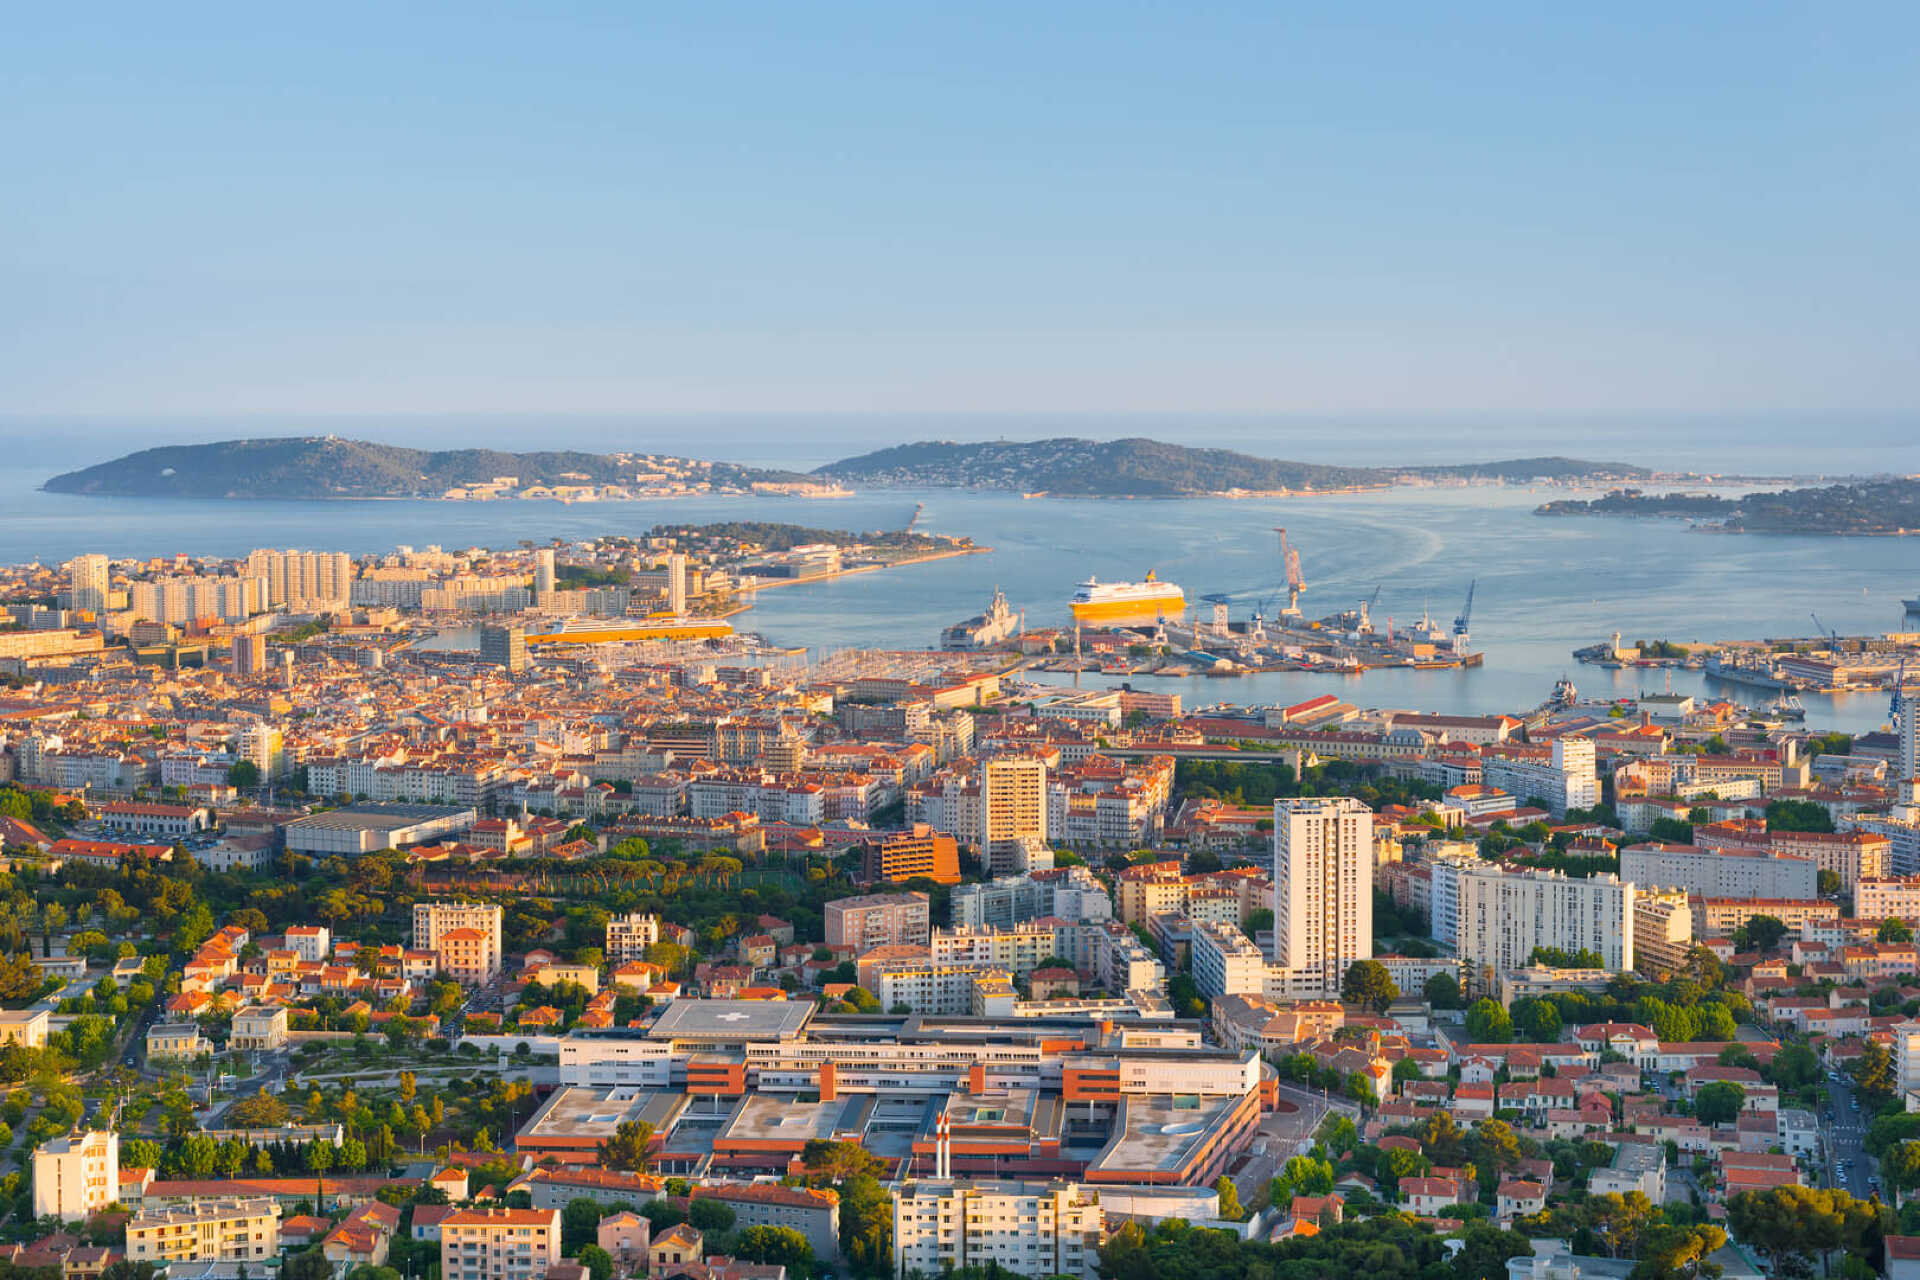 Cityscape of Toulon at sunset time